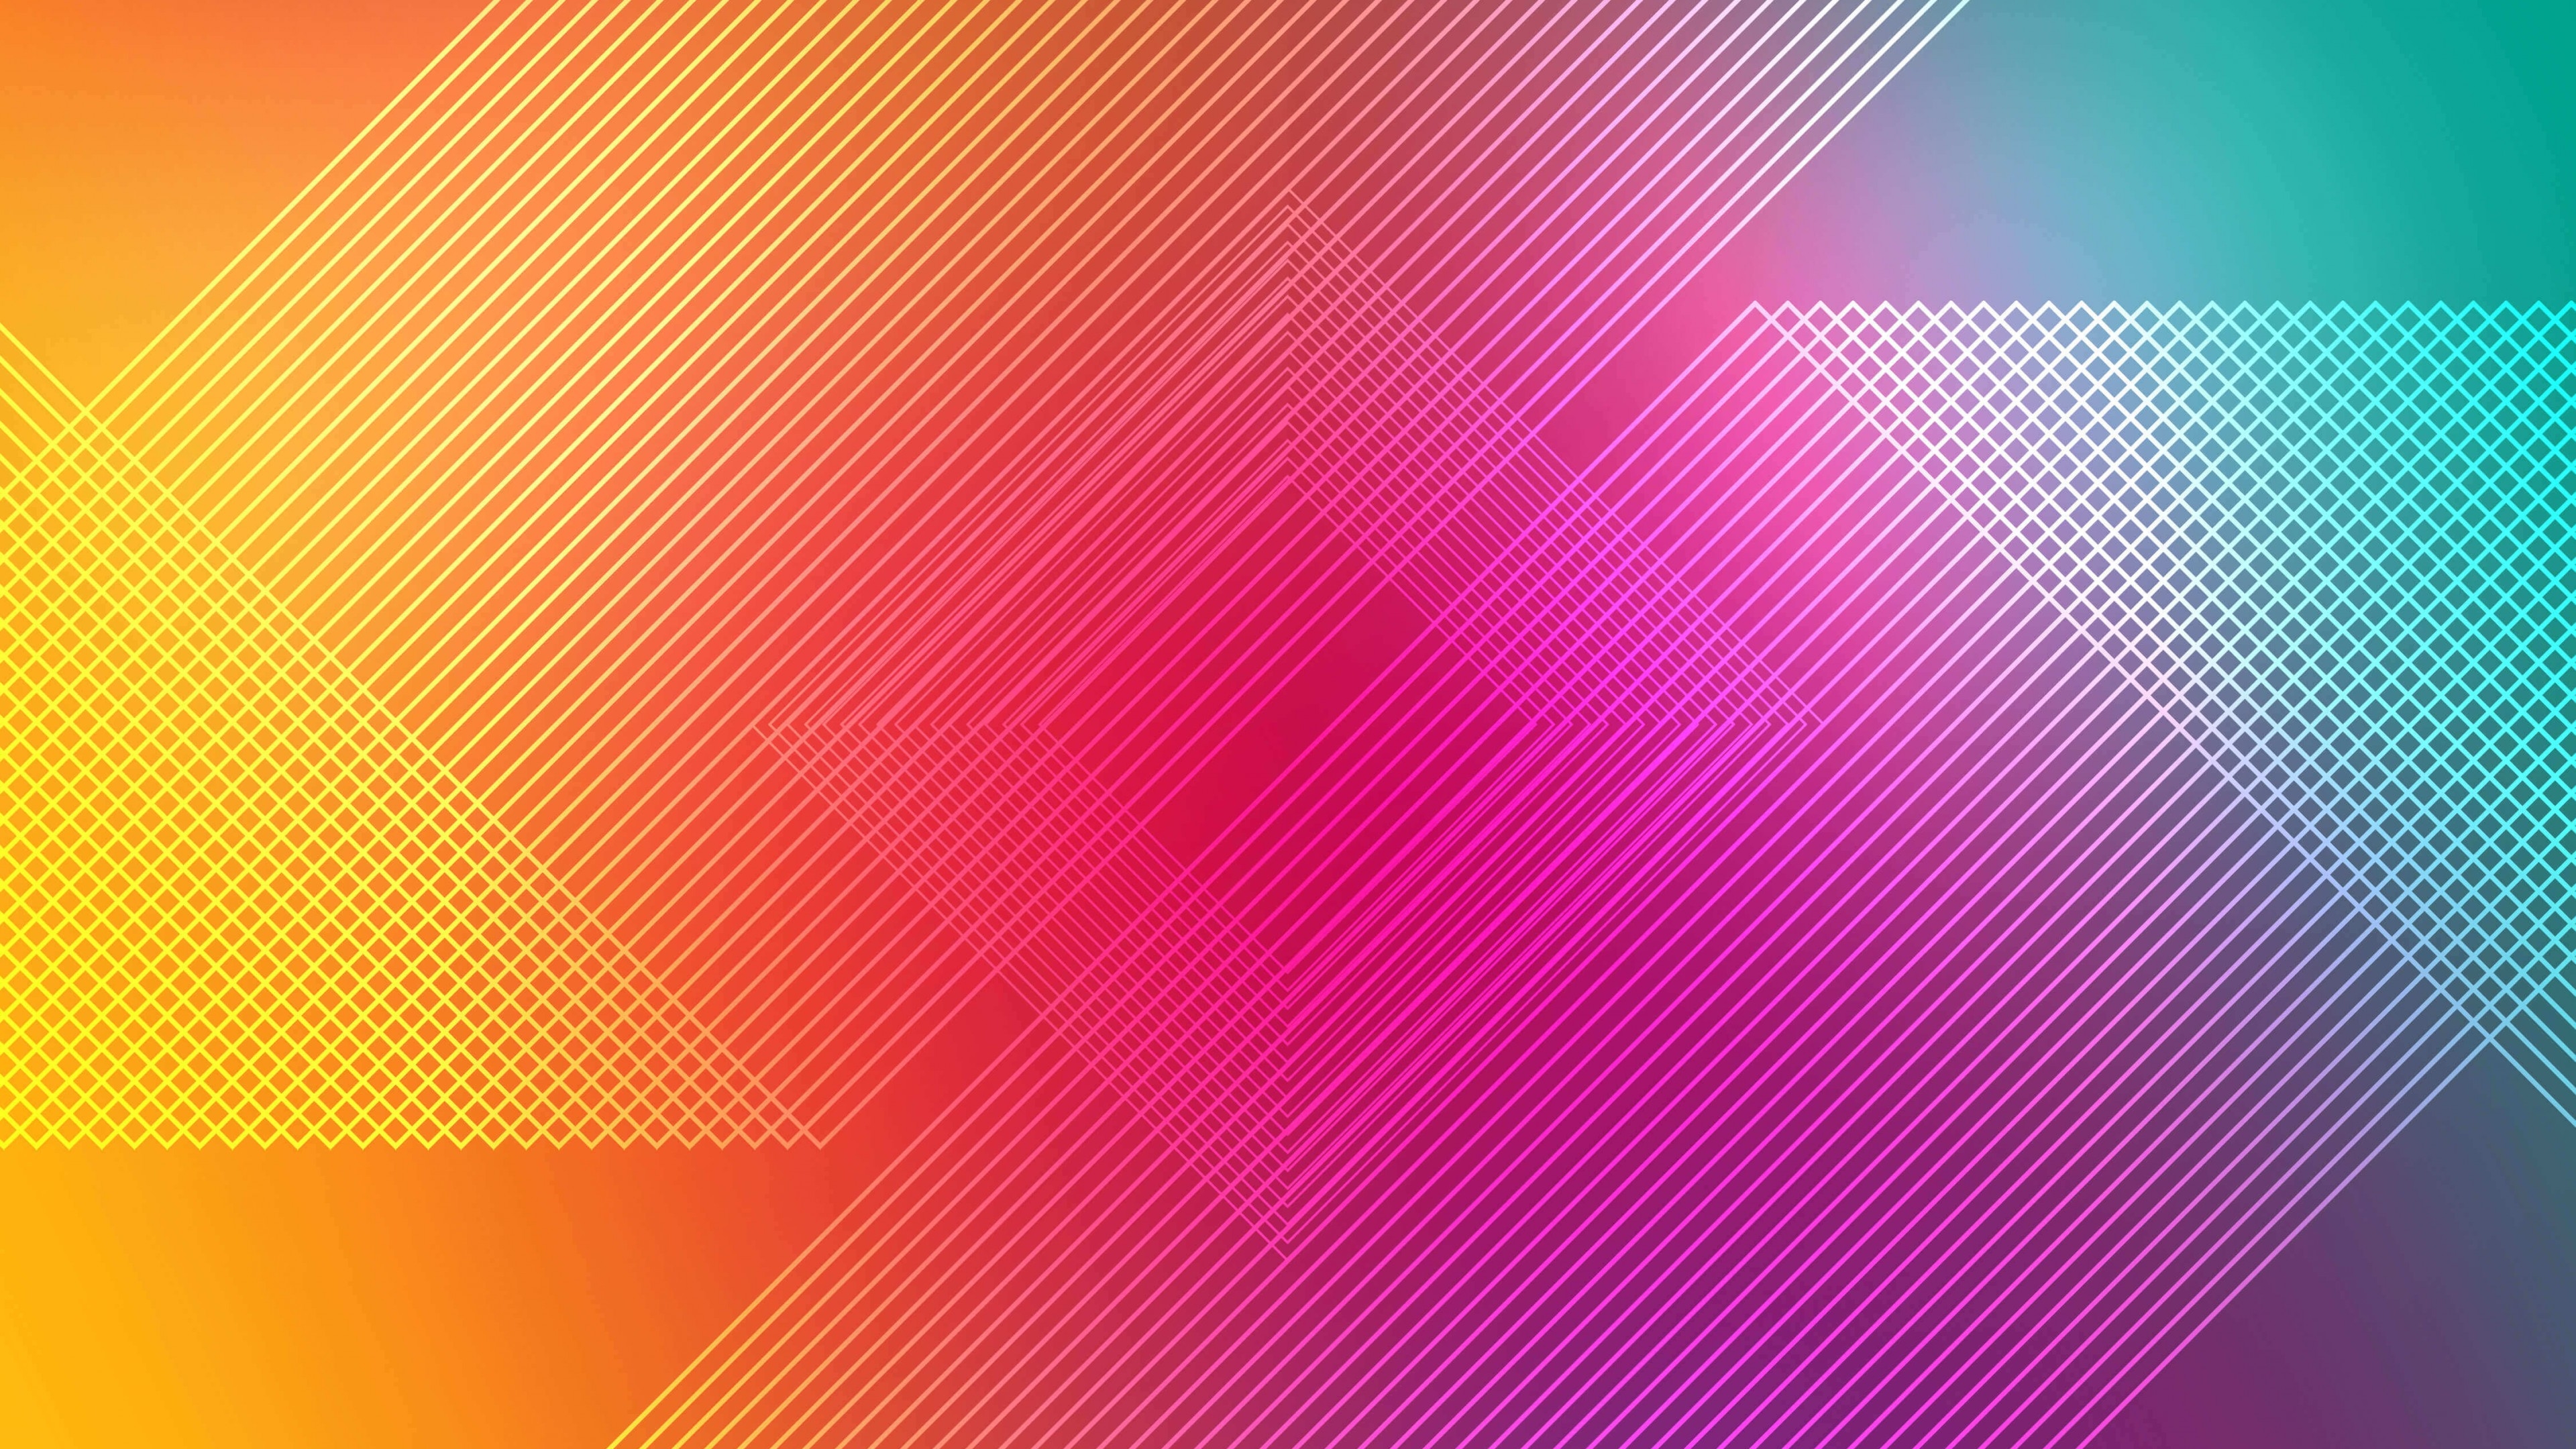 Abstract Background Images  Free iPhone  Zoom HD Wallpapers  Vectors   rawpixel